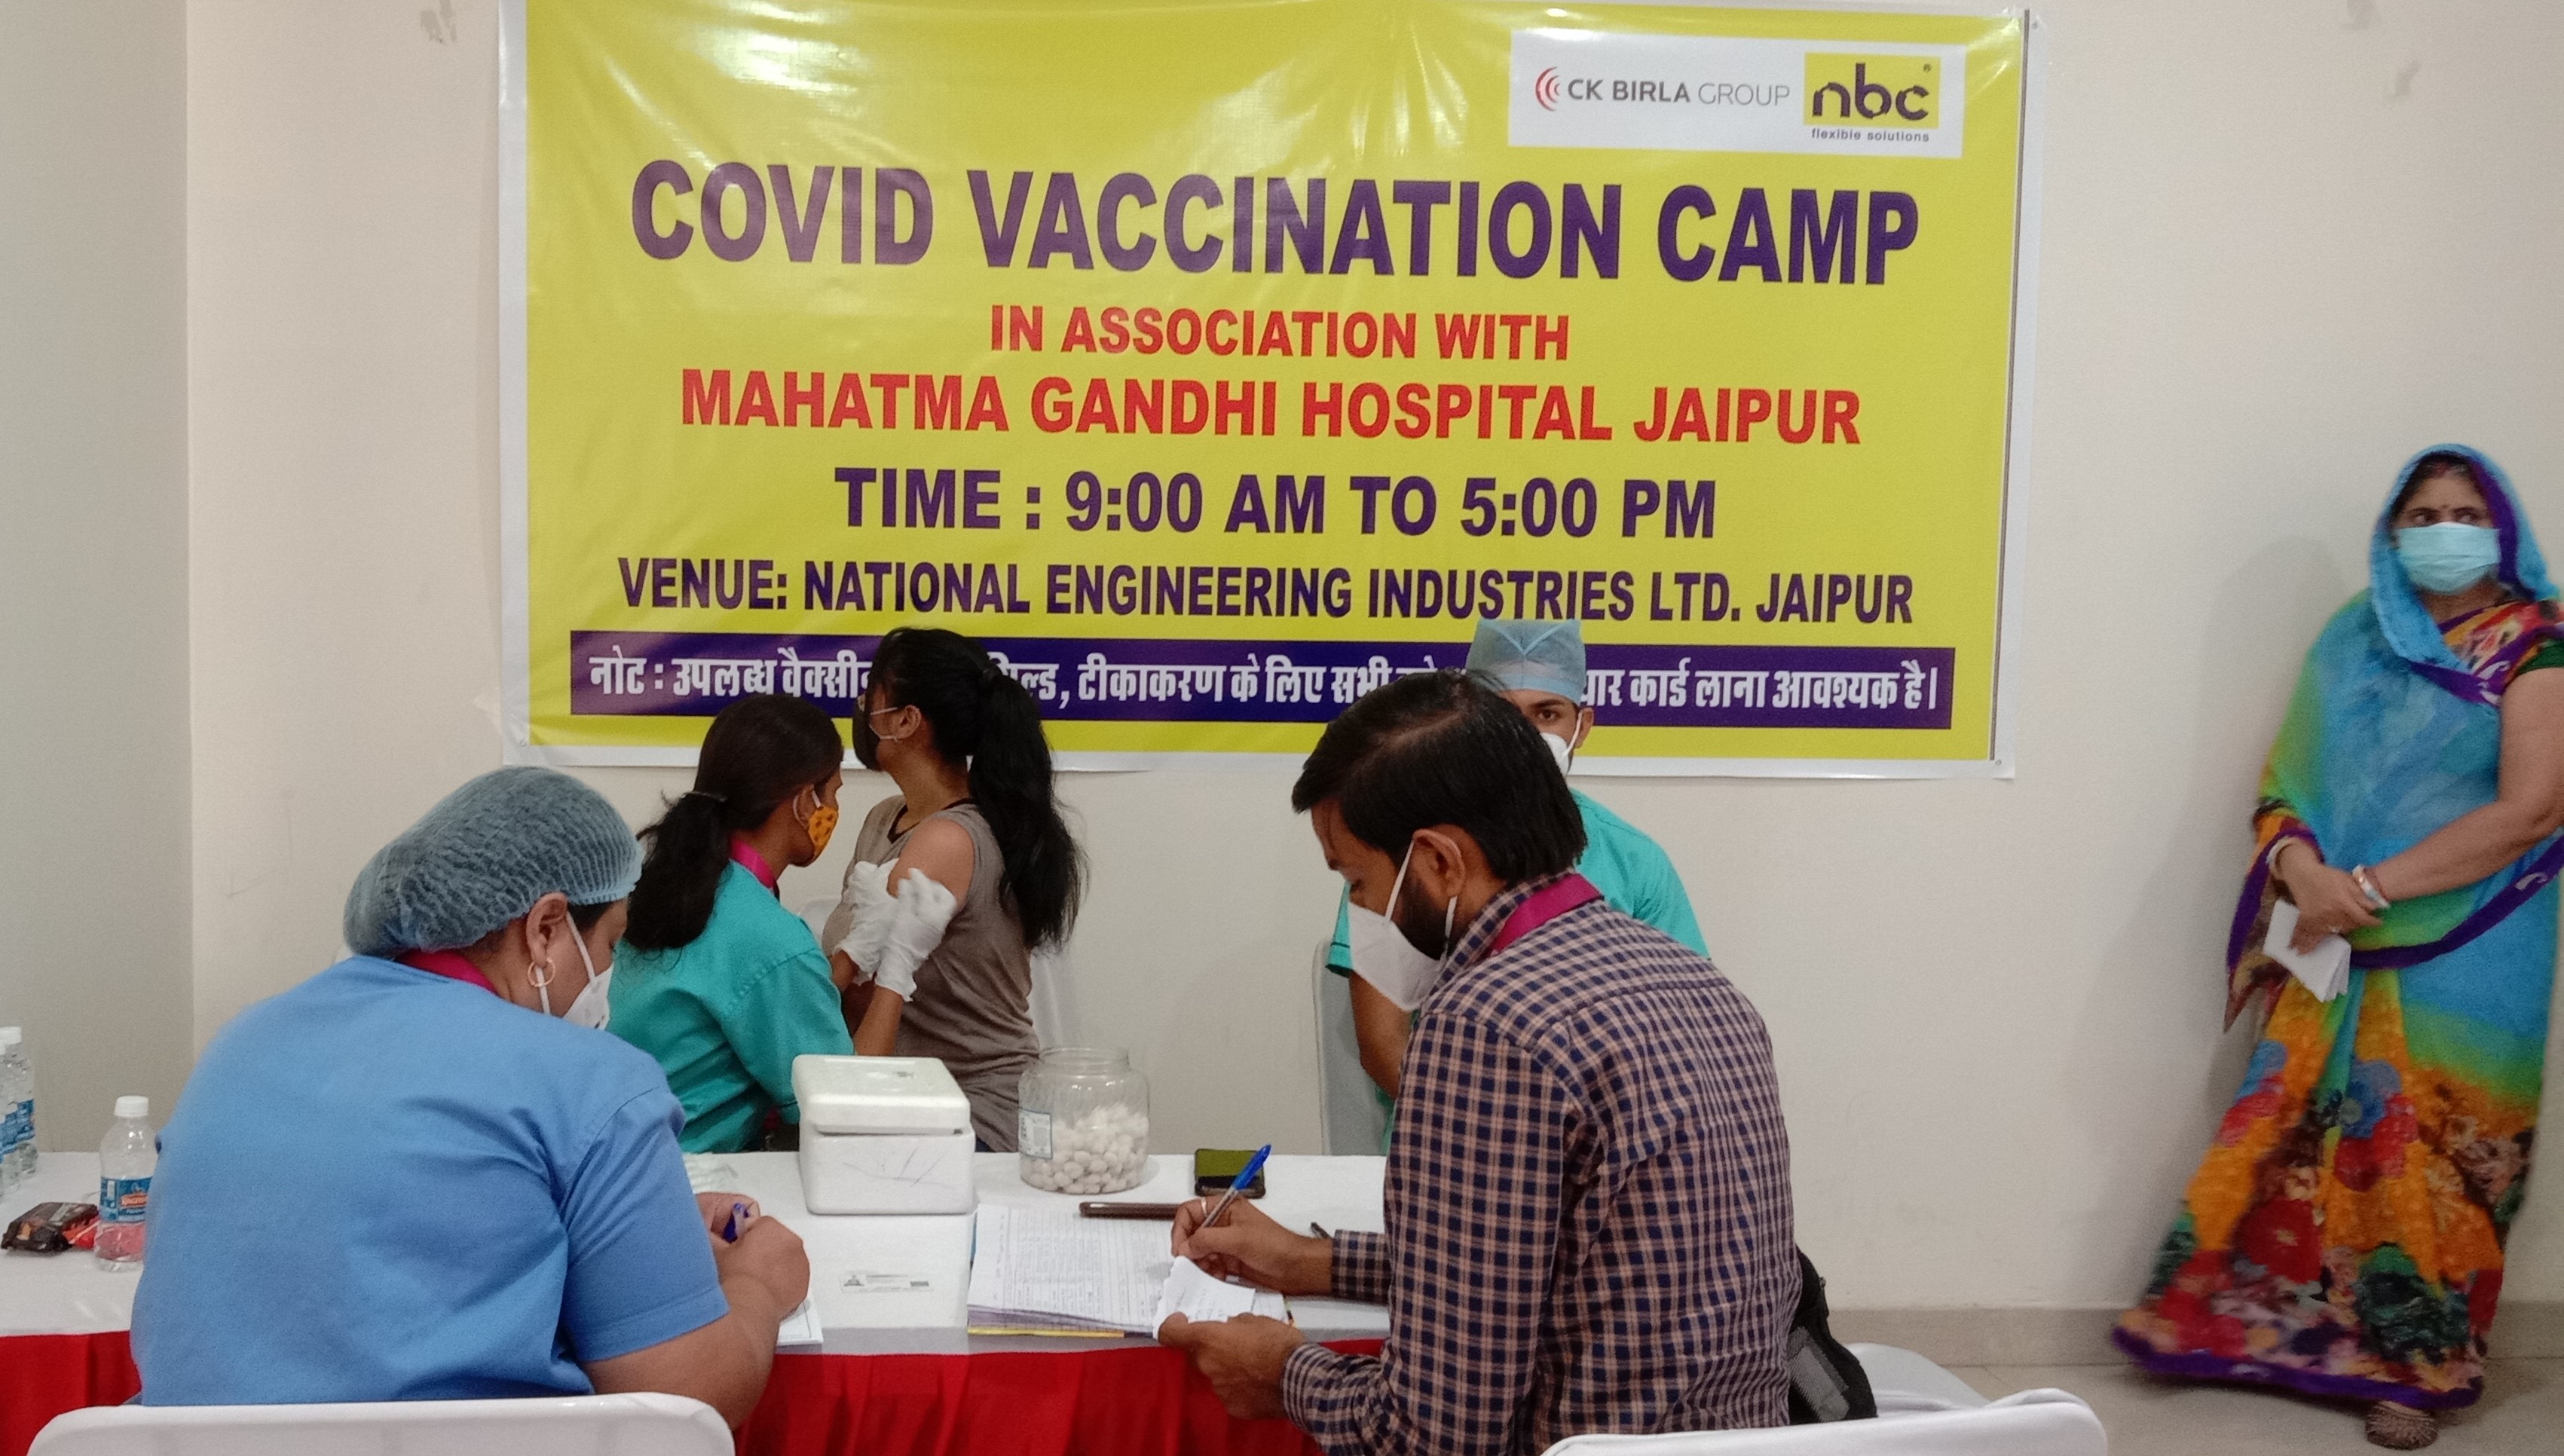 National Engineering Industries Ltd. organises Covid-19 vaccination camp for employees and their family at the Jaipur facility